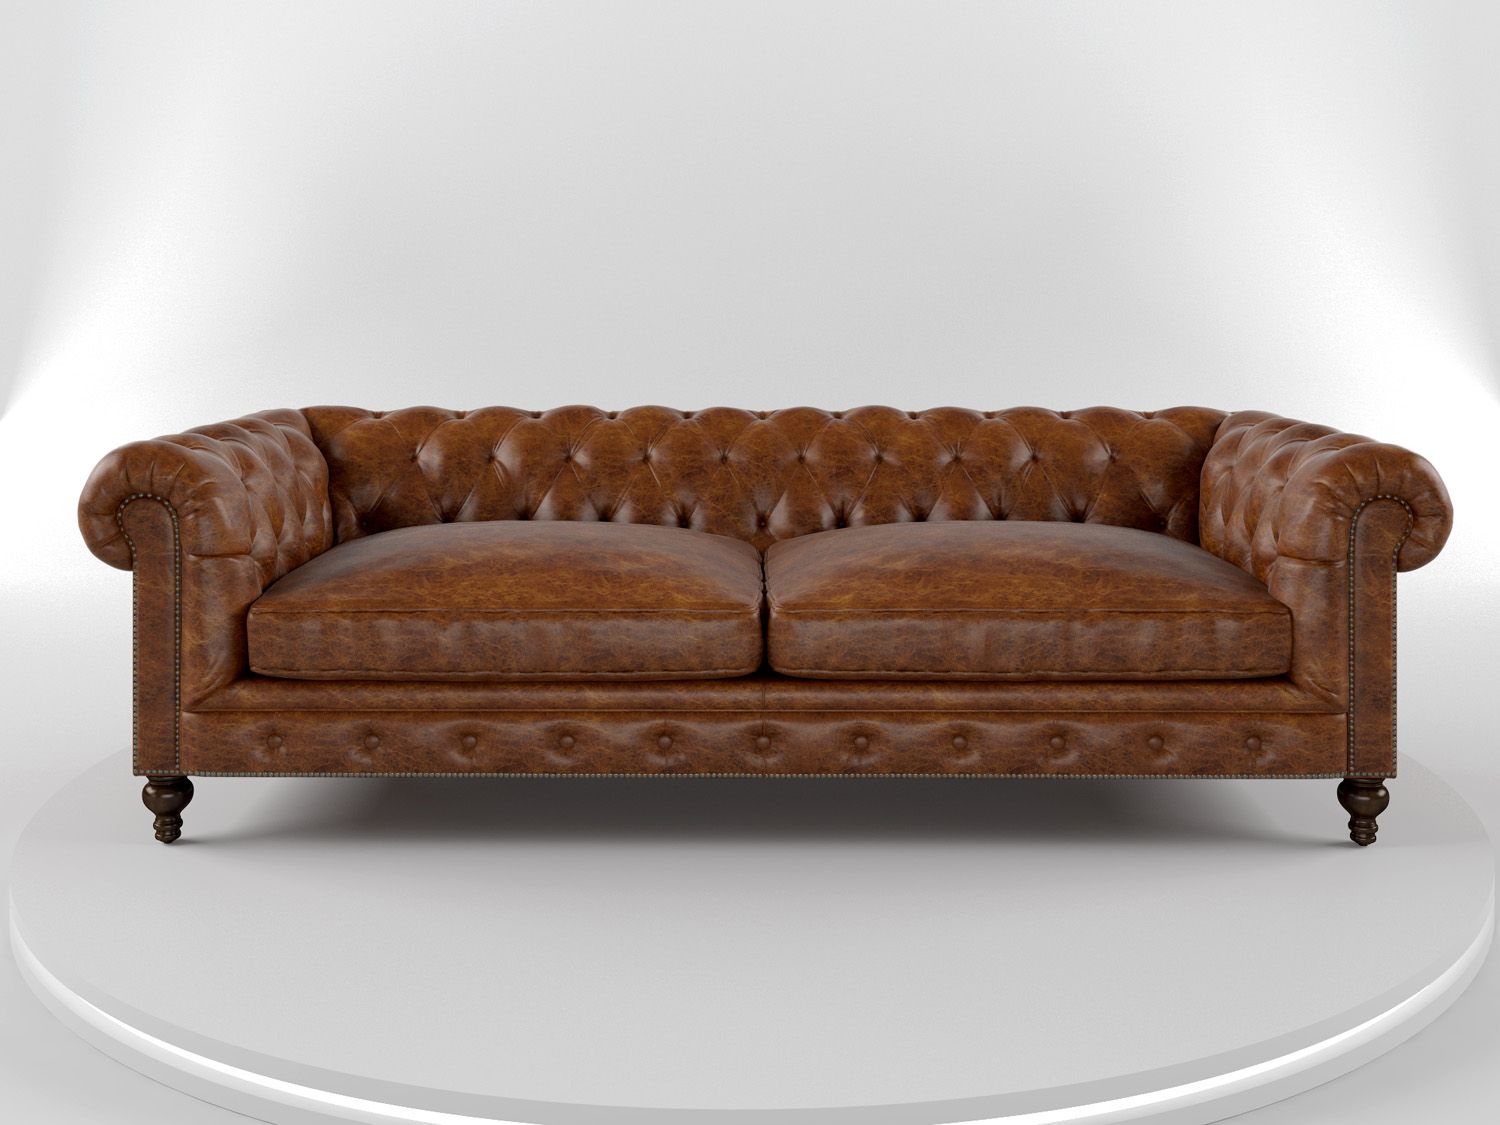 Chesterfield leather sofa classic Chesterfield KTKPPTD